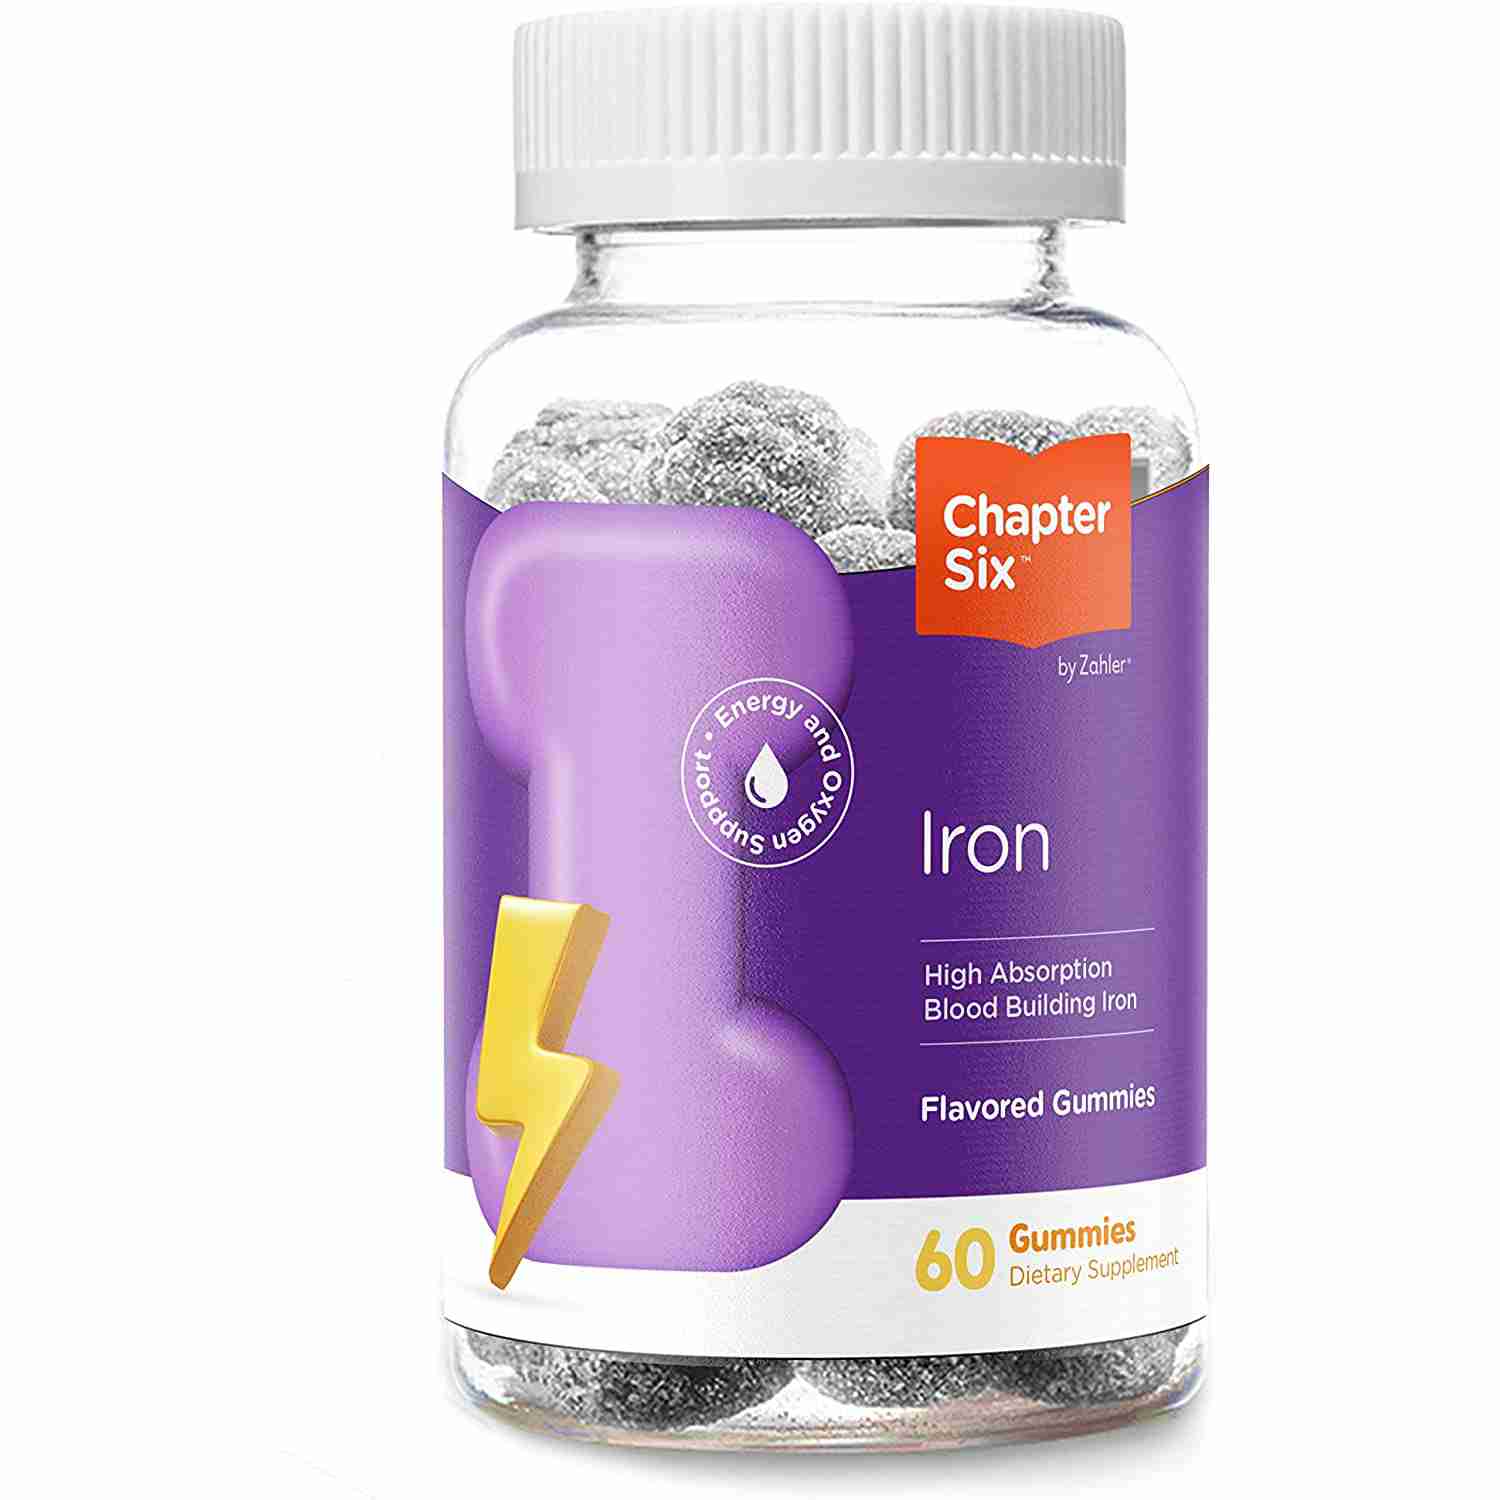 iron-gummies-supplement with cash back rebate